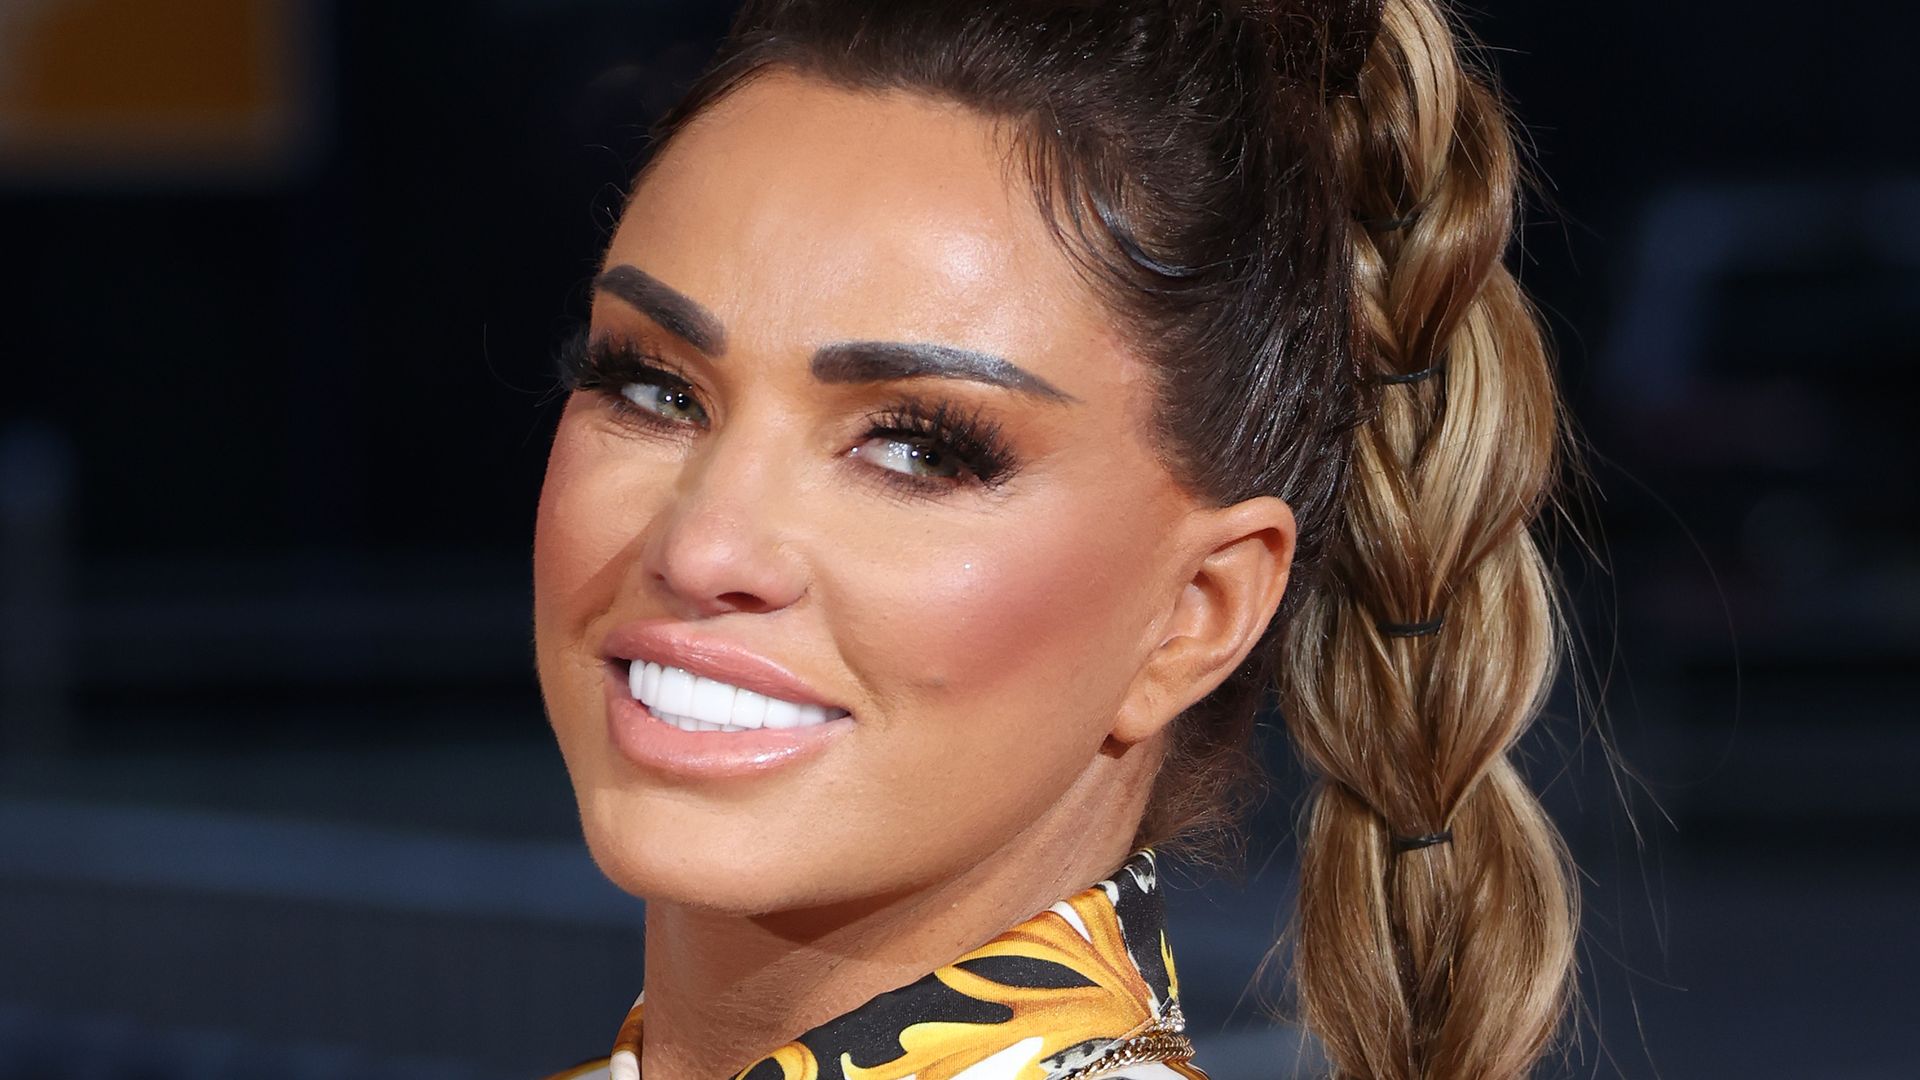 Katie Prices smiling for a photo at a red carpet event